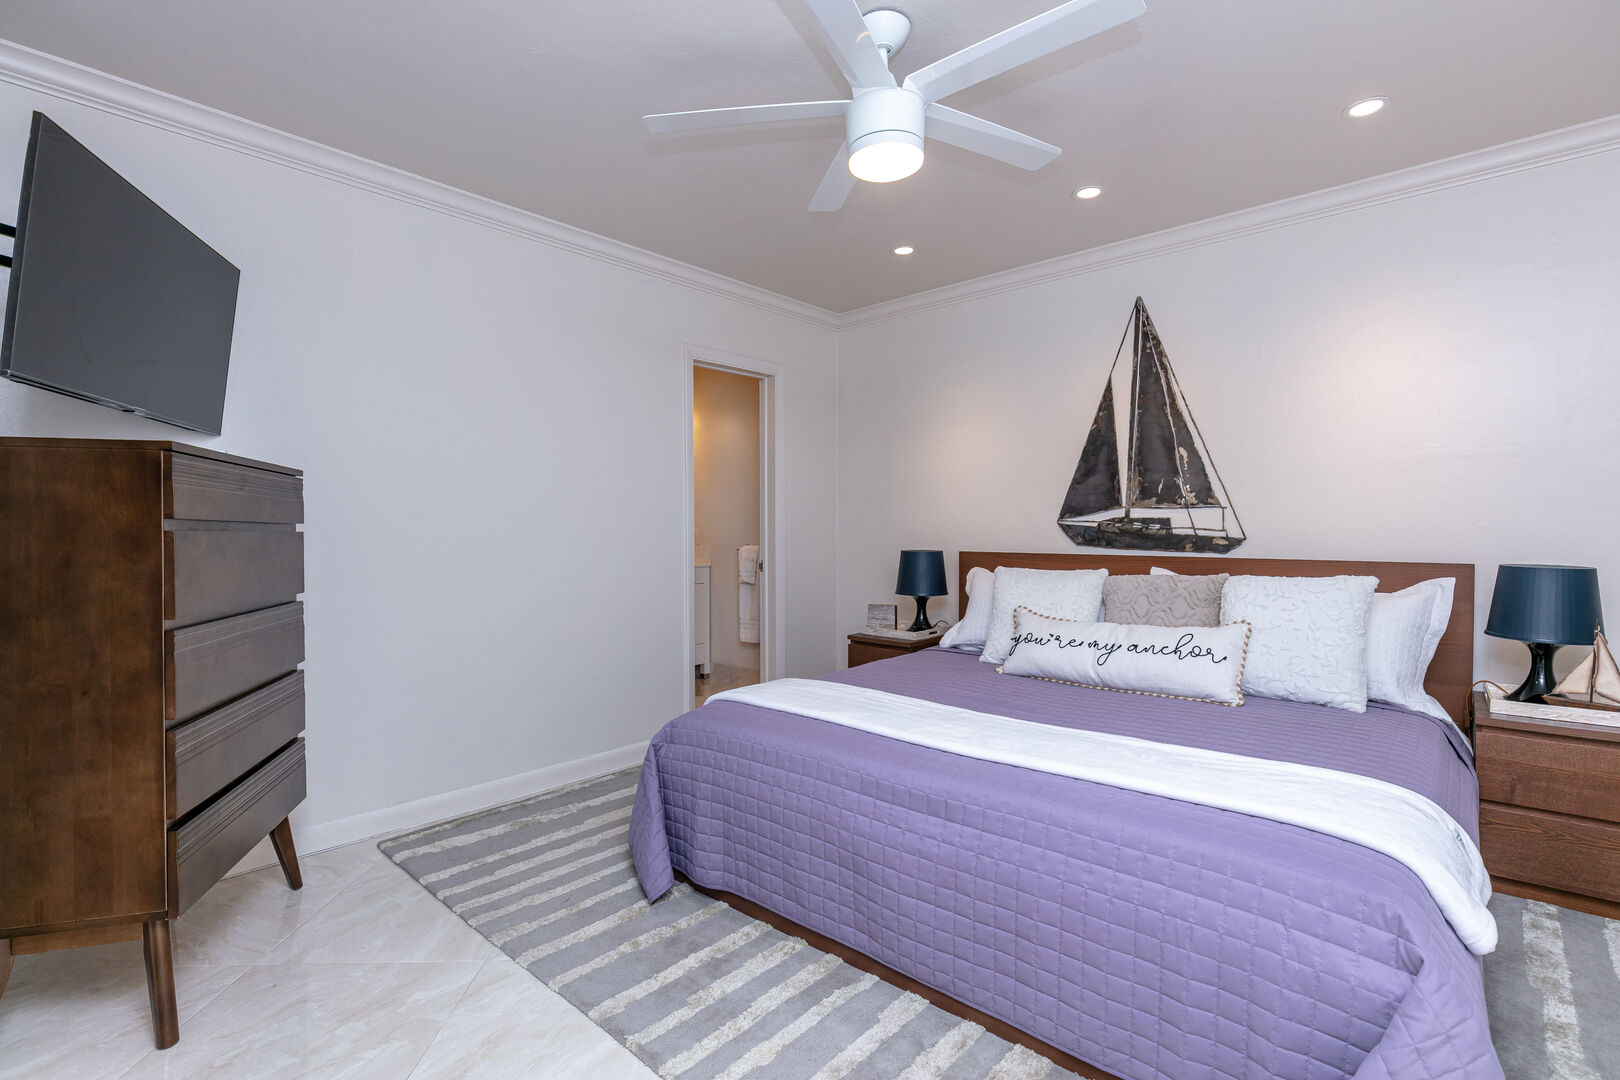 The master bedroom features a king-sized bed and a wall-mounted 40" Smart TV. There's also a nice dresser to store your clothes during your stay.